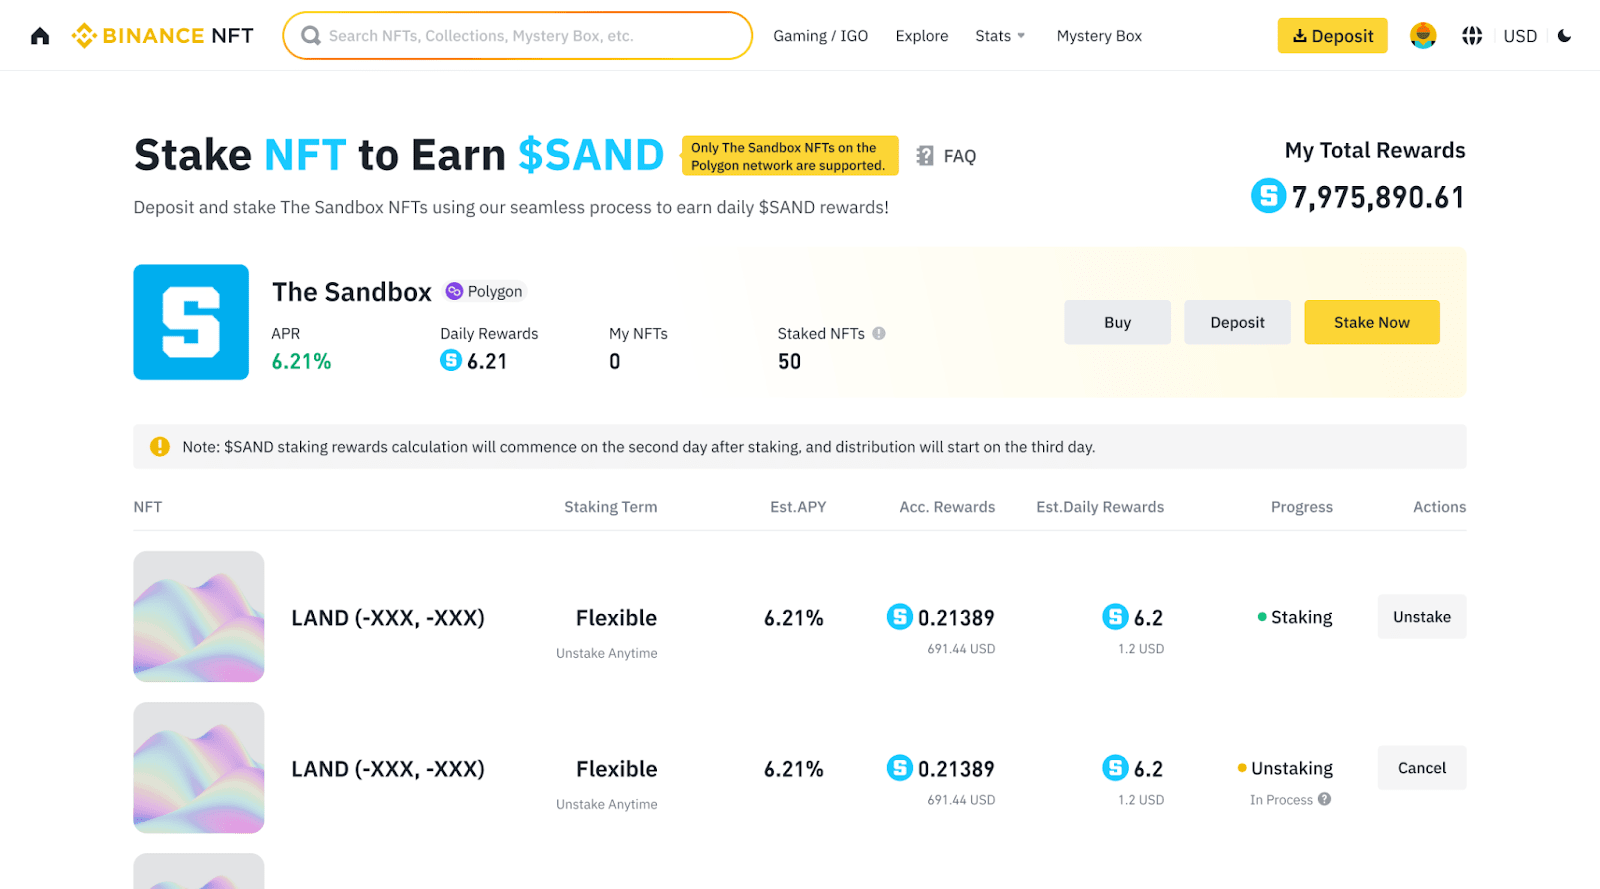 How to Participate in The Sandbox Staking Program